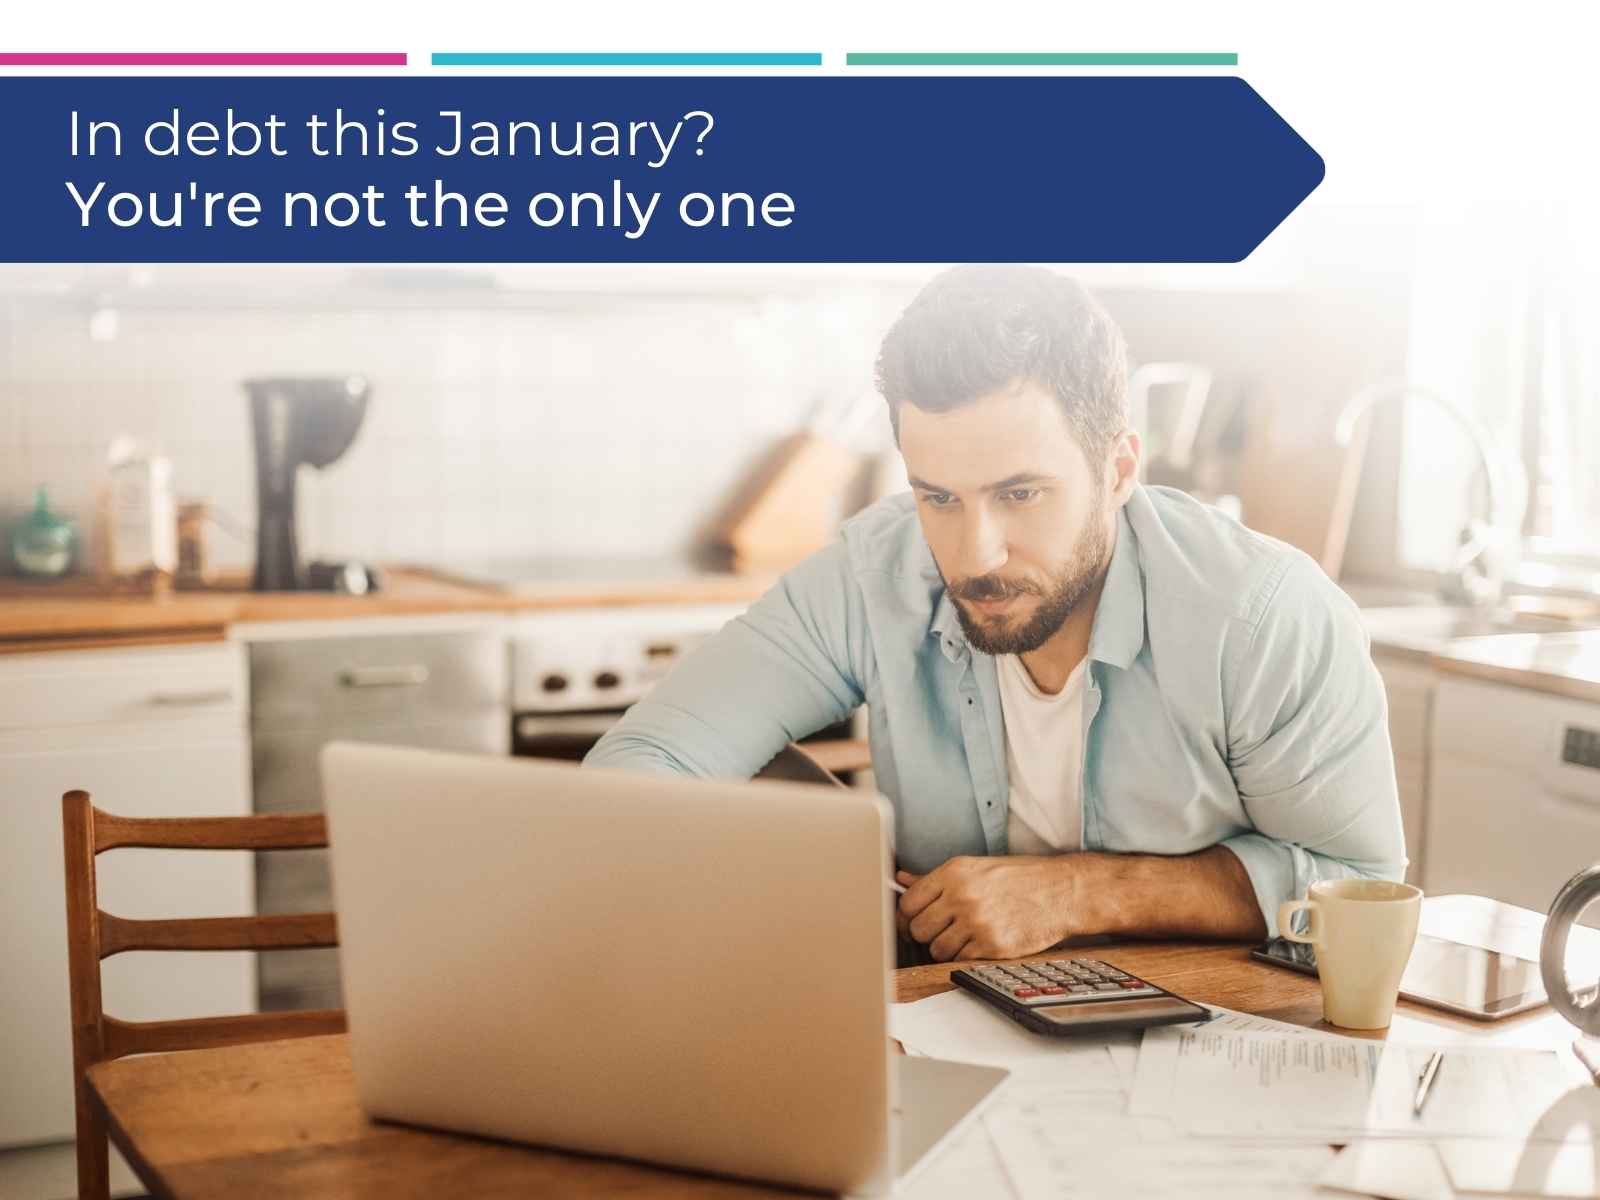 A man thinking he’s the only one in debt this January